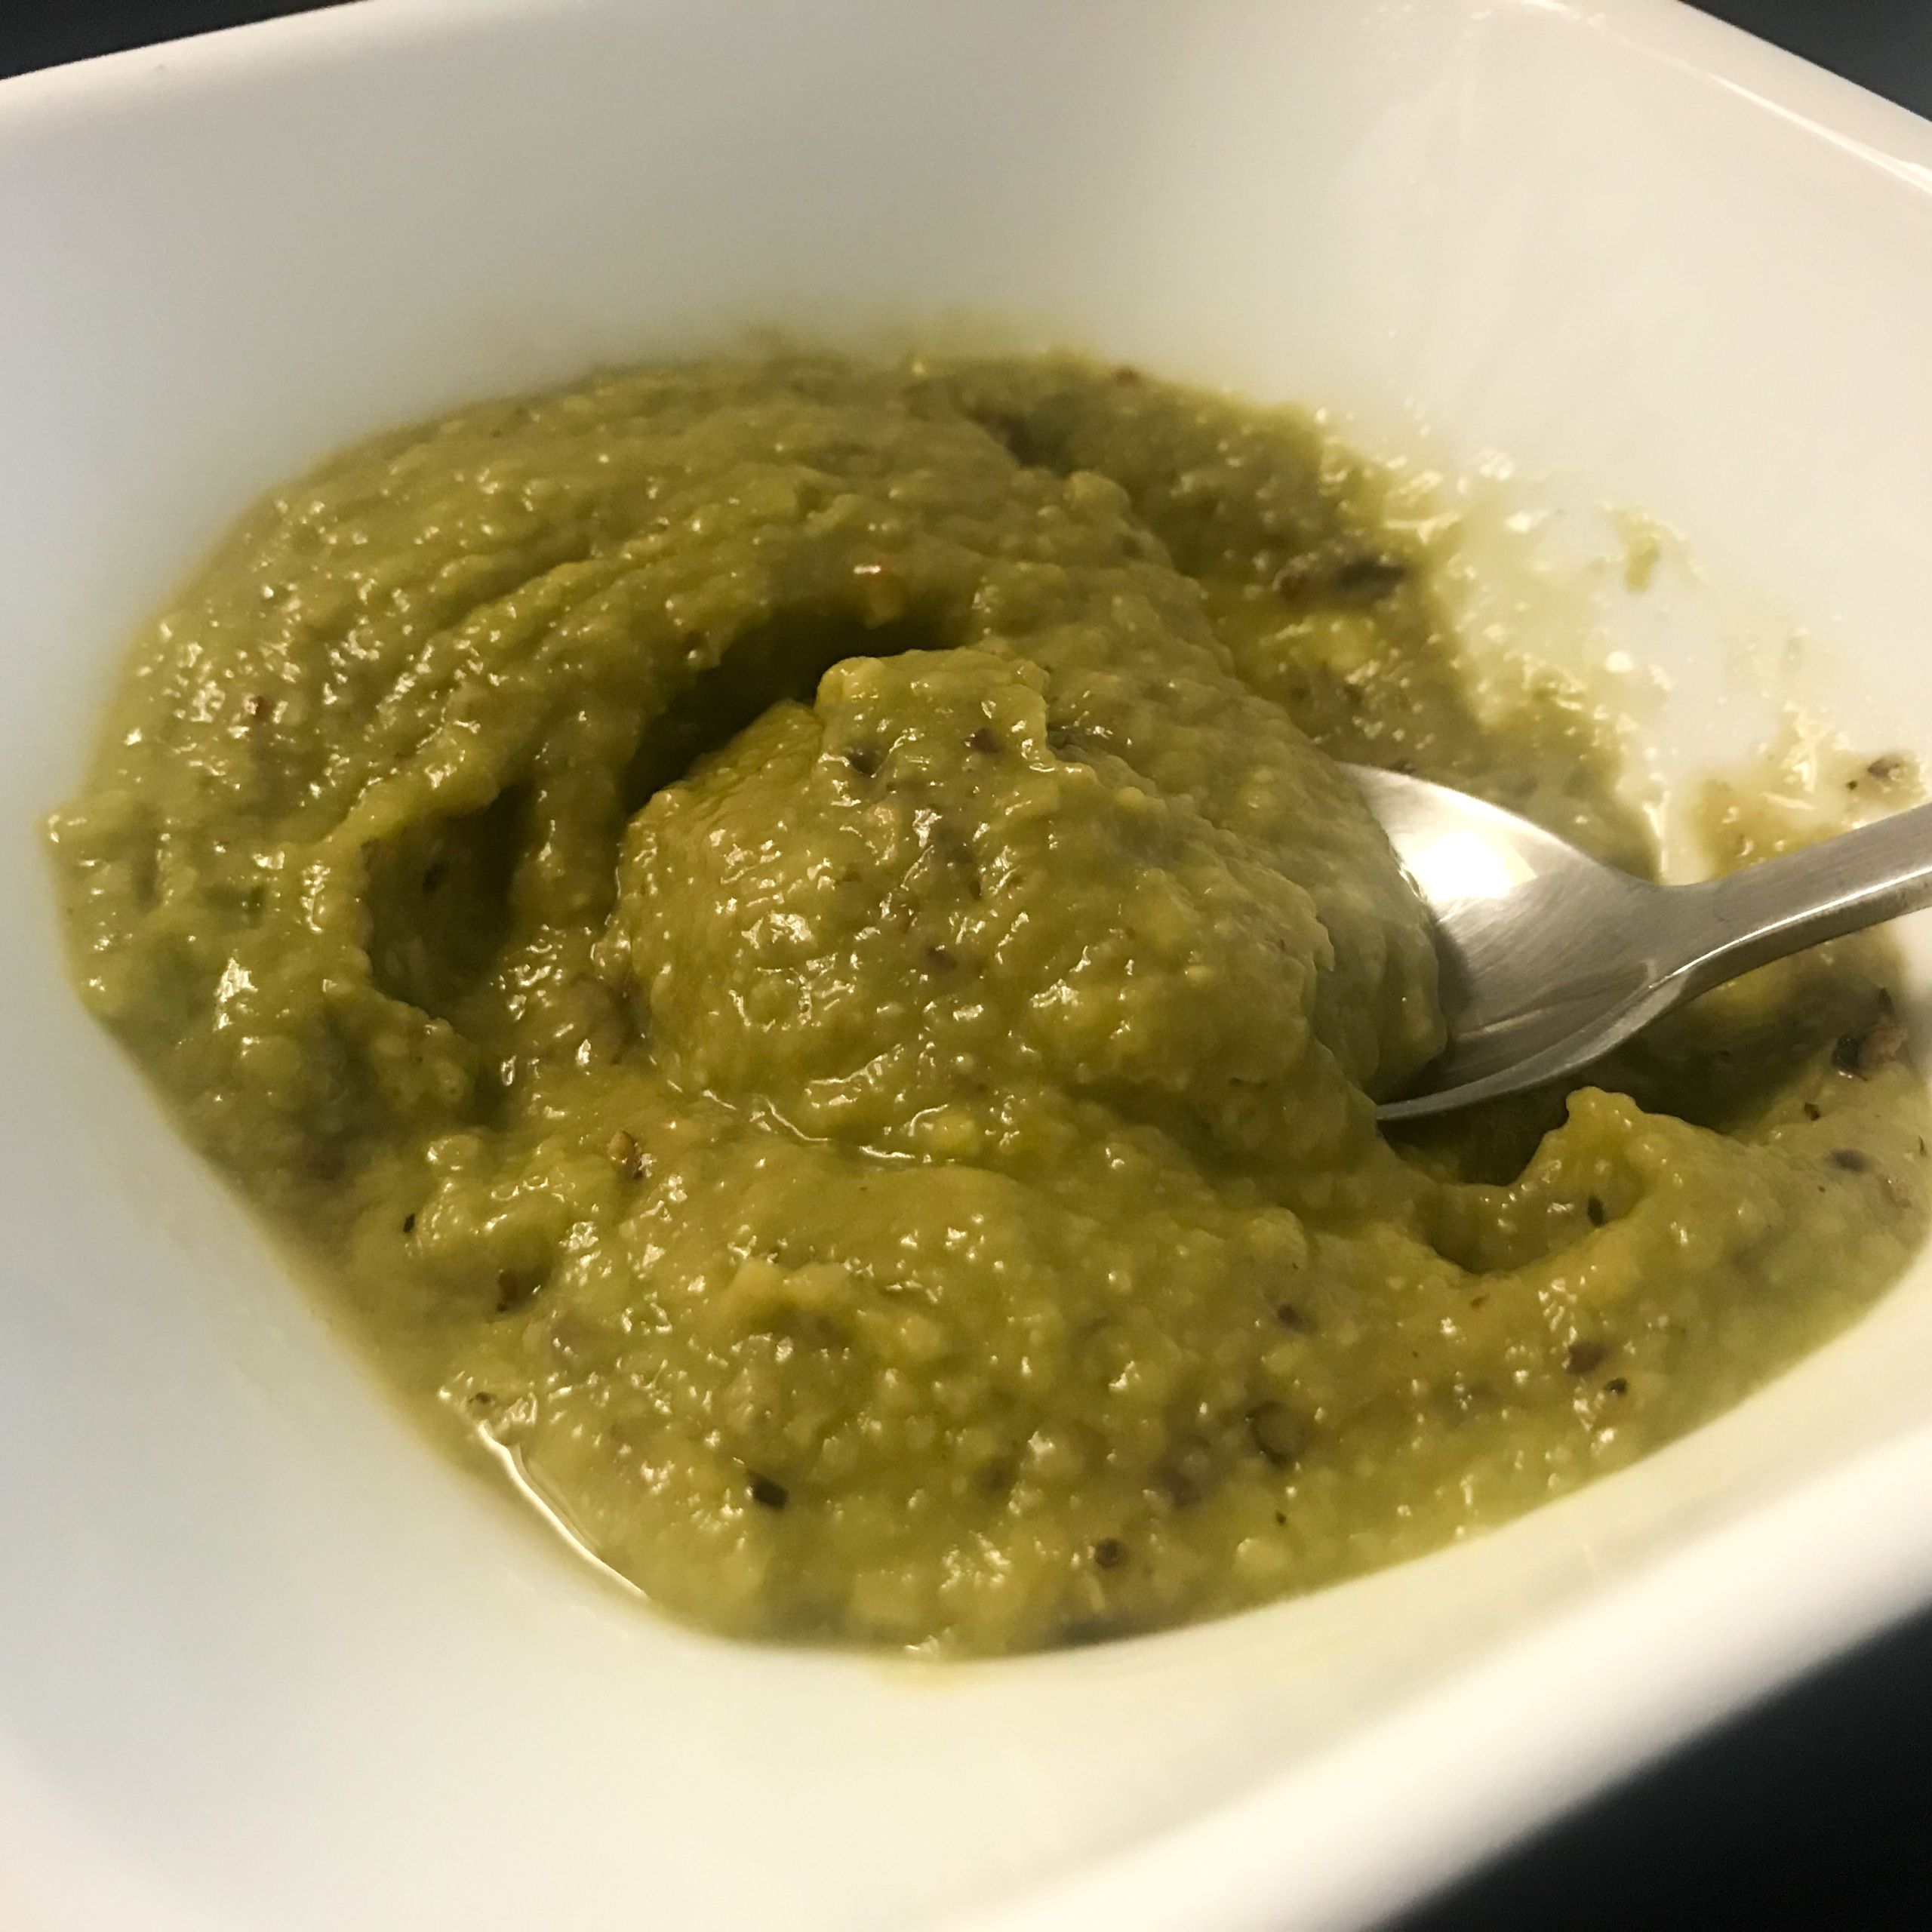 AVOCADO AND NECTARINE SAUCE IN A BOWL